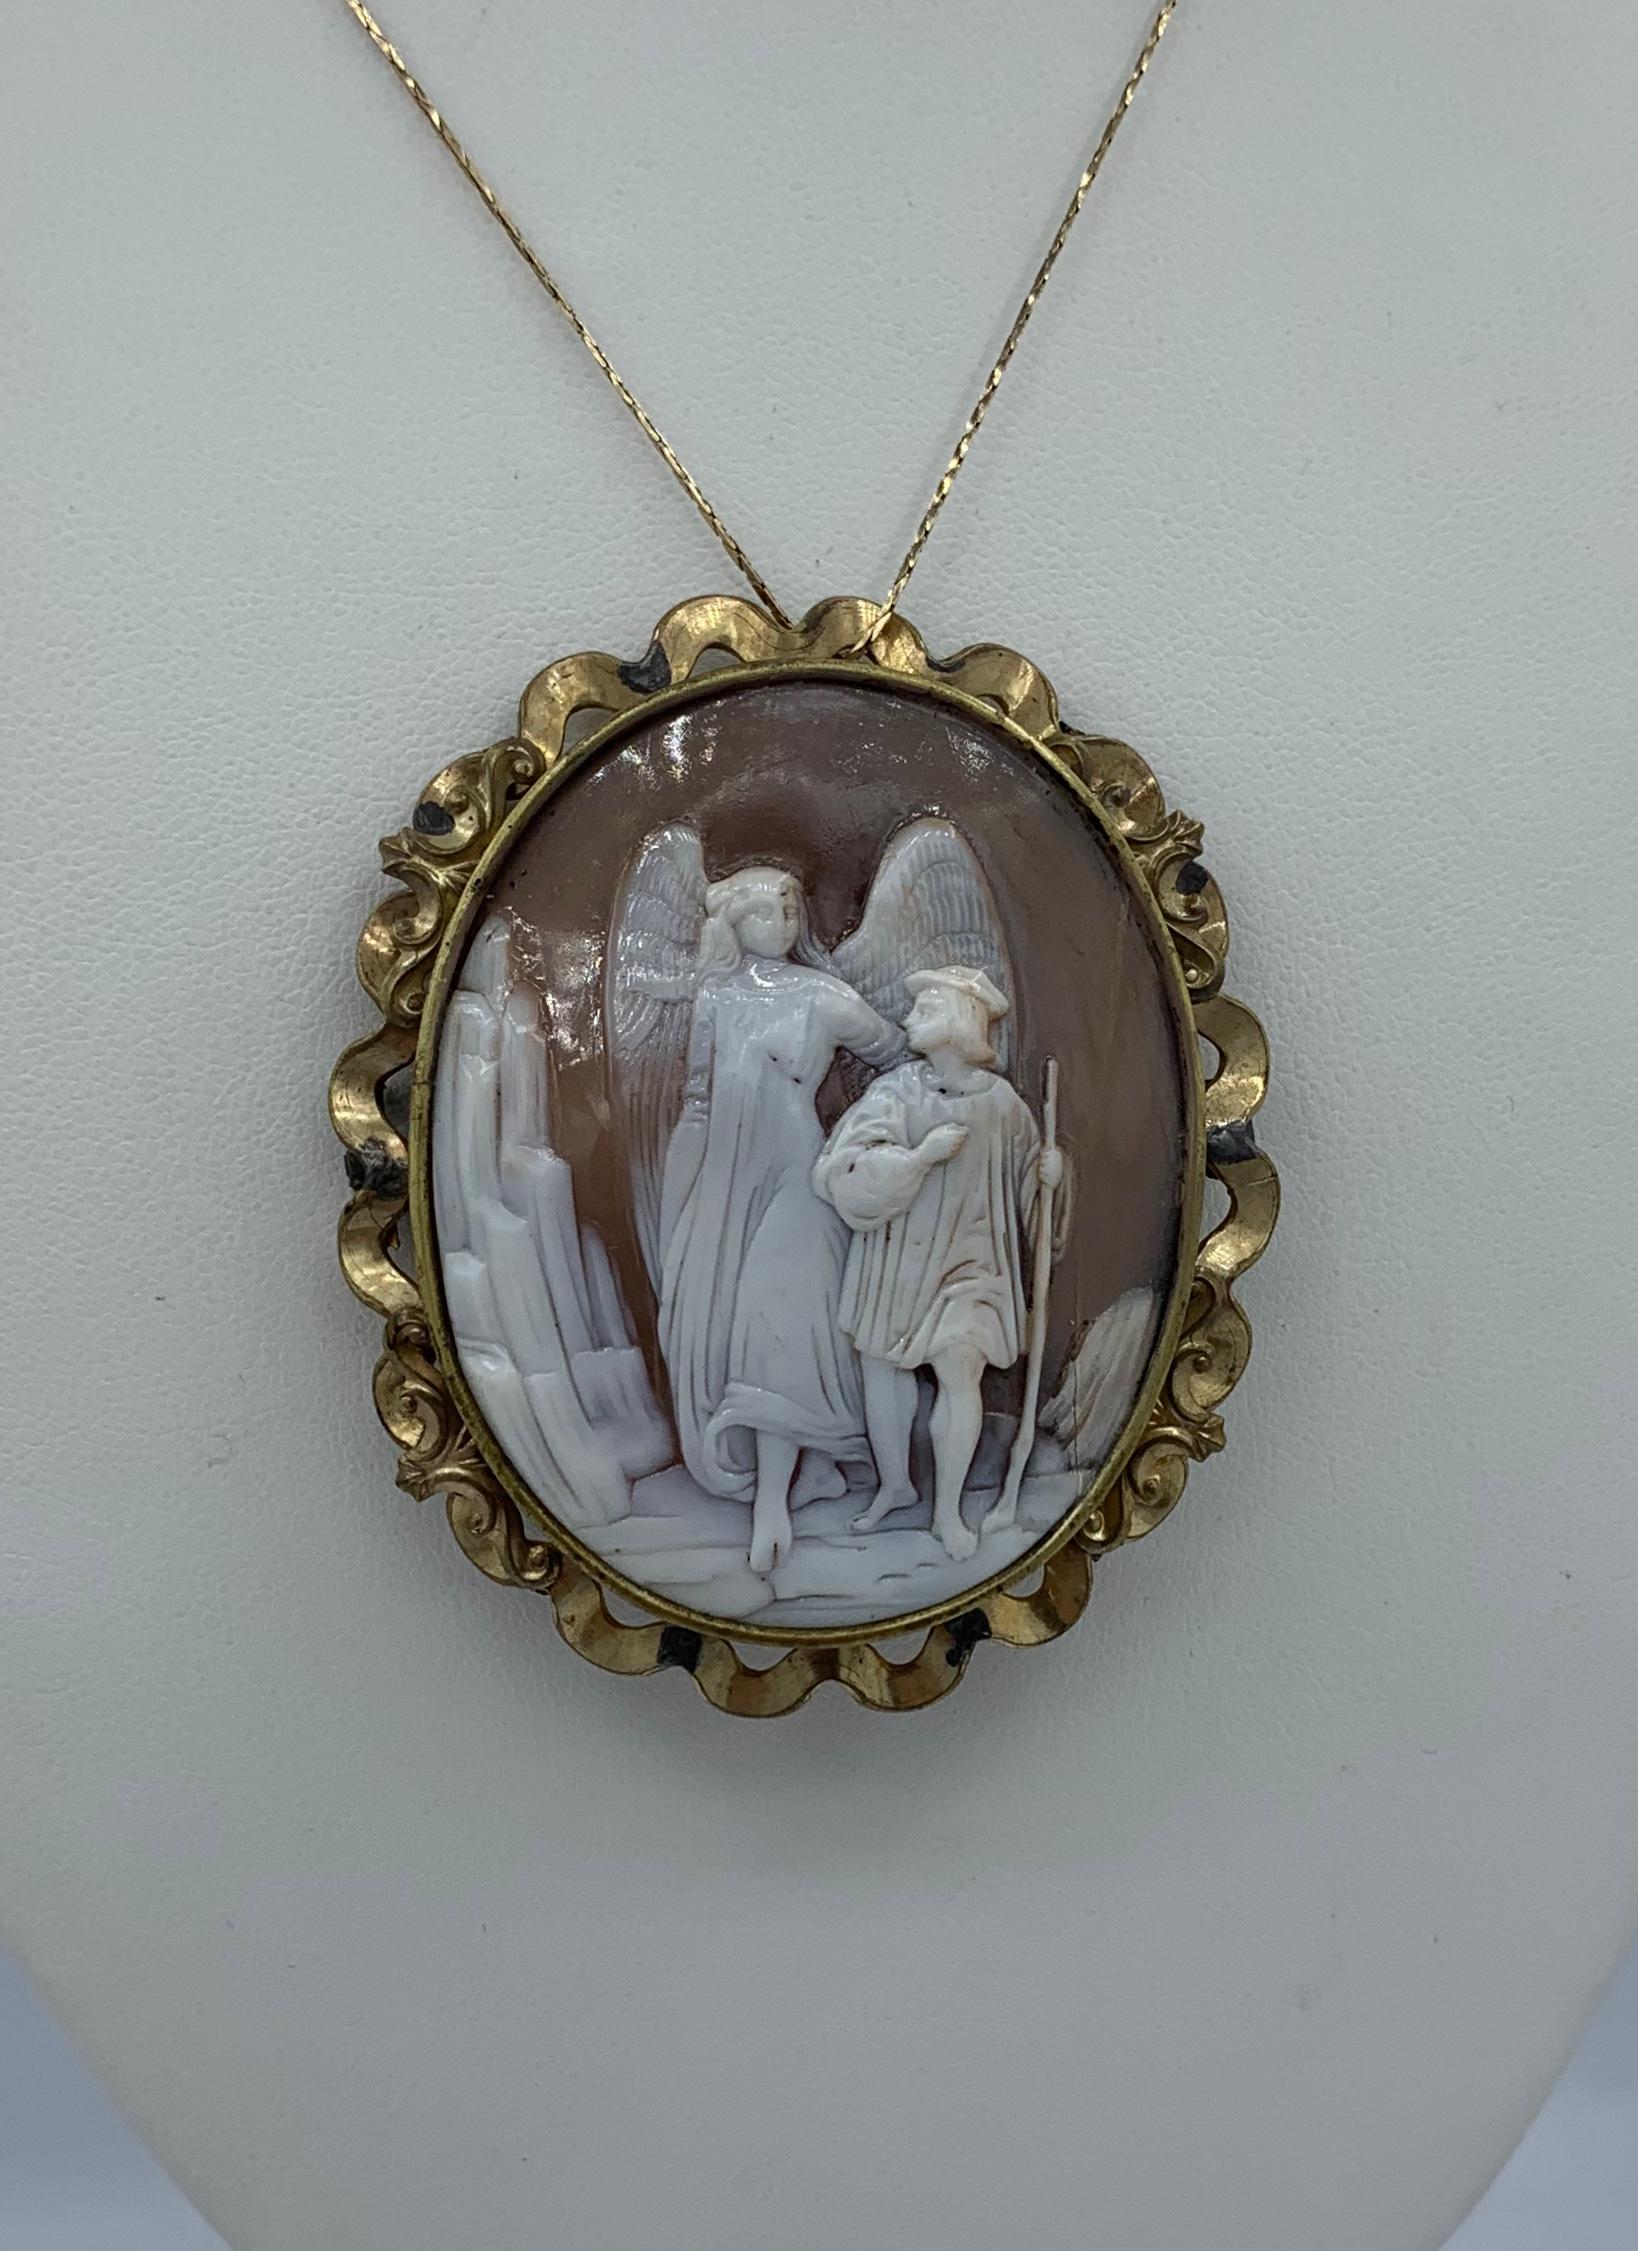 This is an absolutely stunning and very rare large 2.5 inch tall antique Victorian - Belle Epoque Shell Cameo Pendant Brooch Pin with a hand carved image of a Guardian Angel with Child walking on a mountain top set in a beautiful scrolling